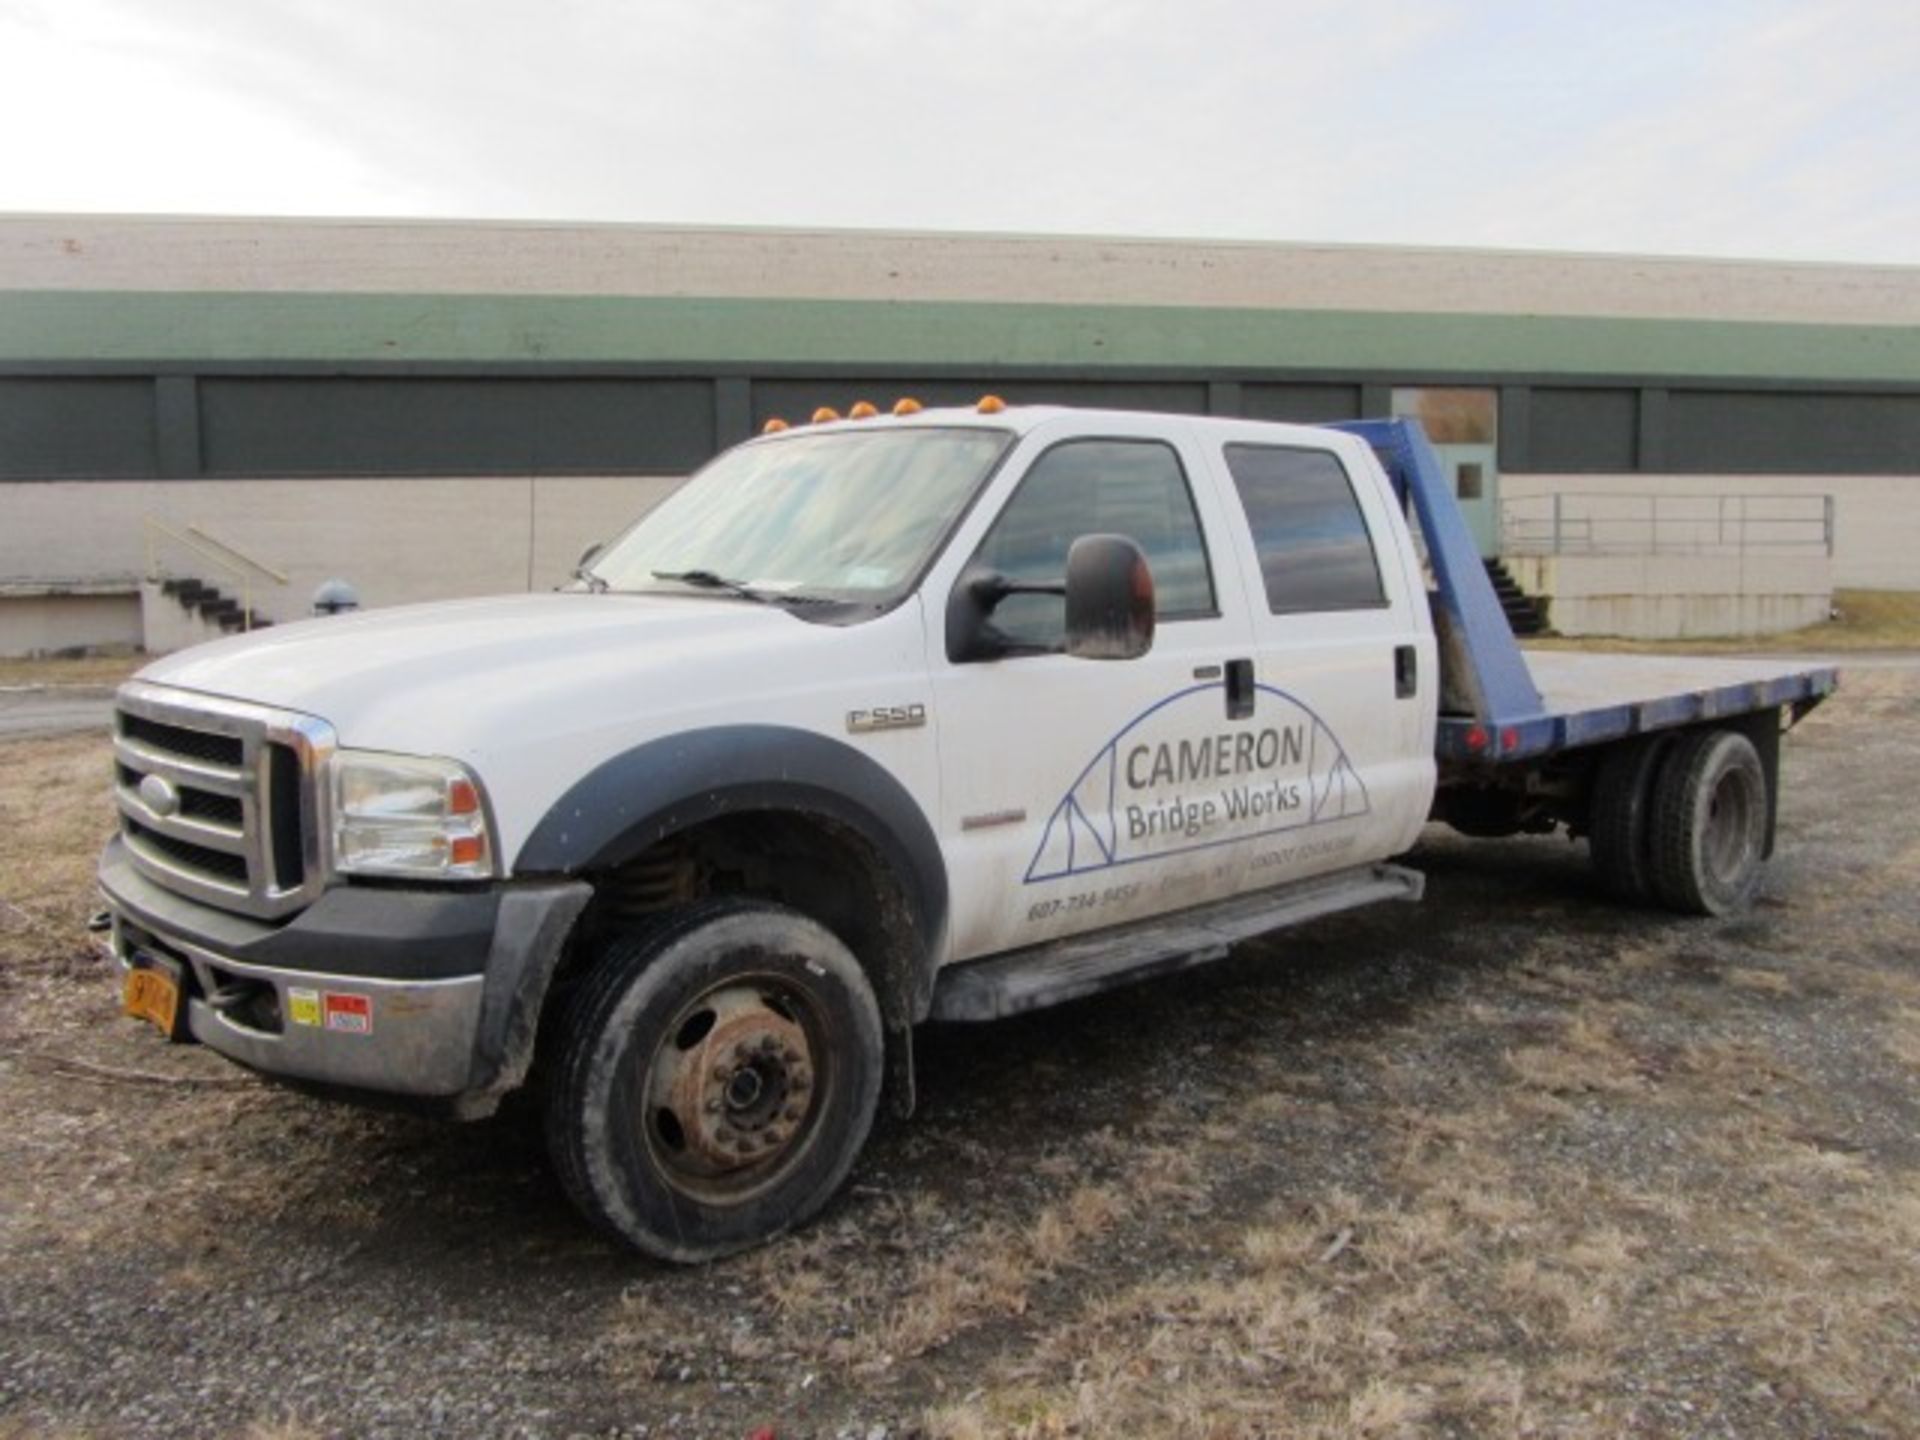 Ford F550 XLT Super Duty Flat Bed Truck with Gooseneck Hitch, 10' Diamond Plate Deck, Dual Rear